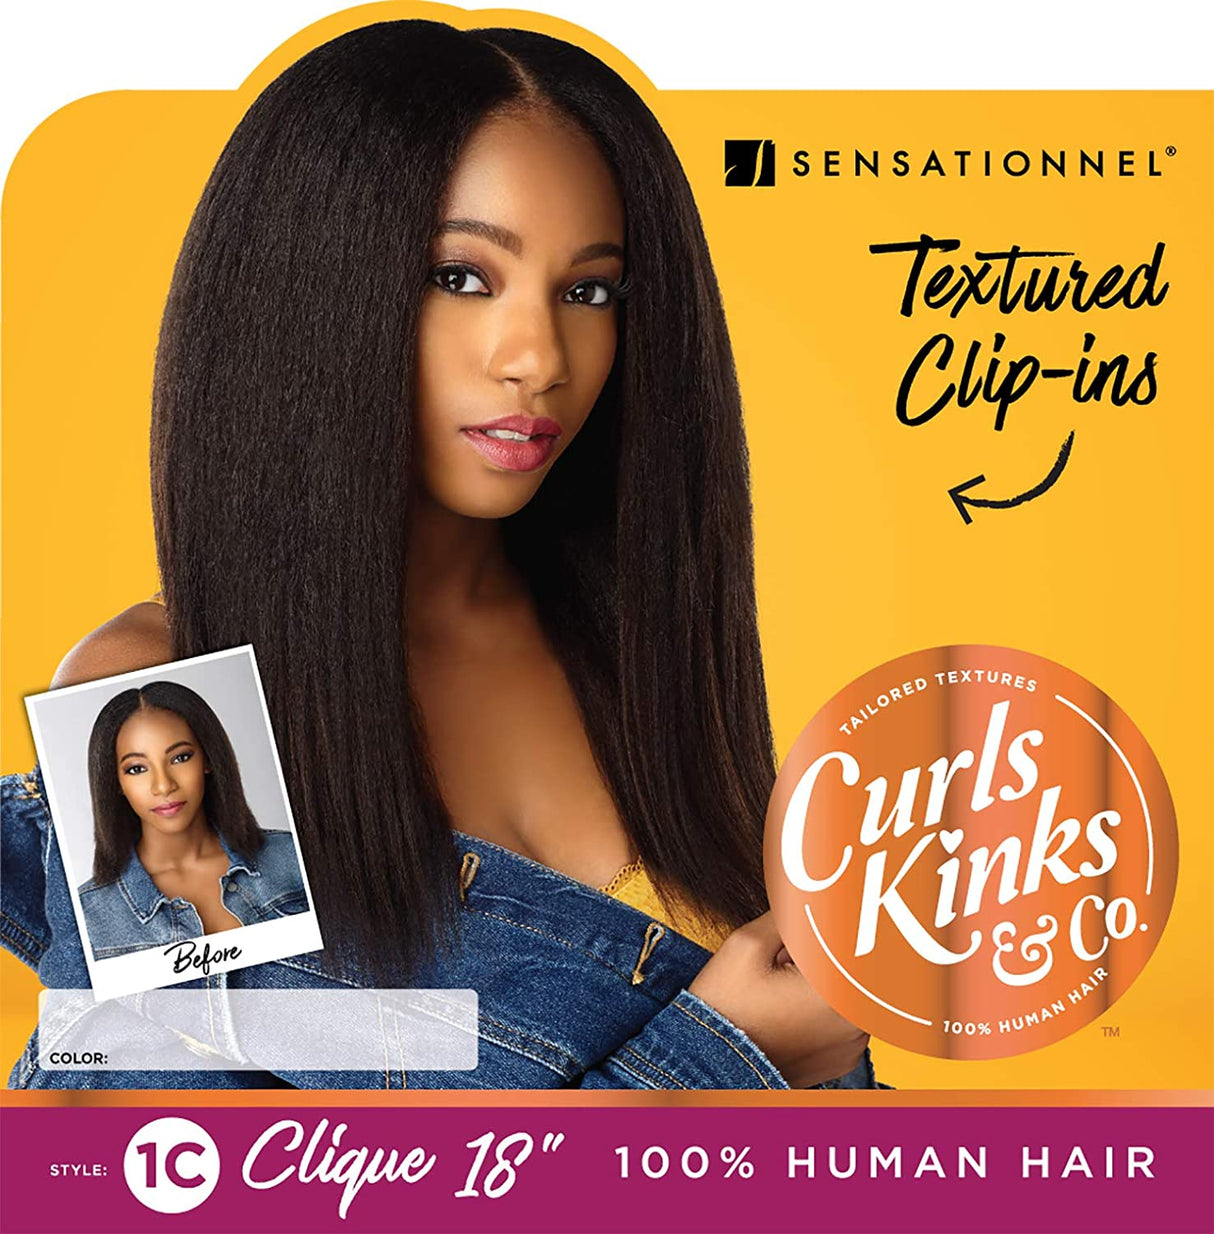 Sensationnel hair extensions - human hair 1c clique 16 curls kinks & co (NATURAL) Find Your New Look Today!